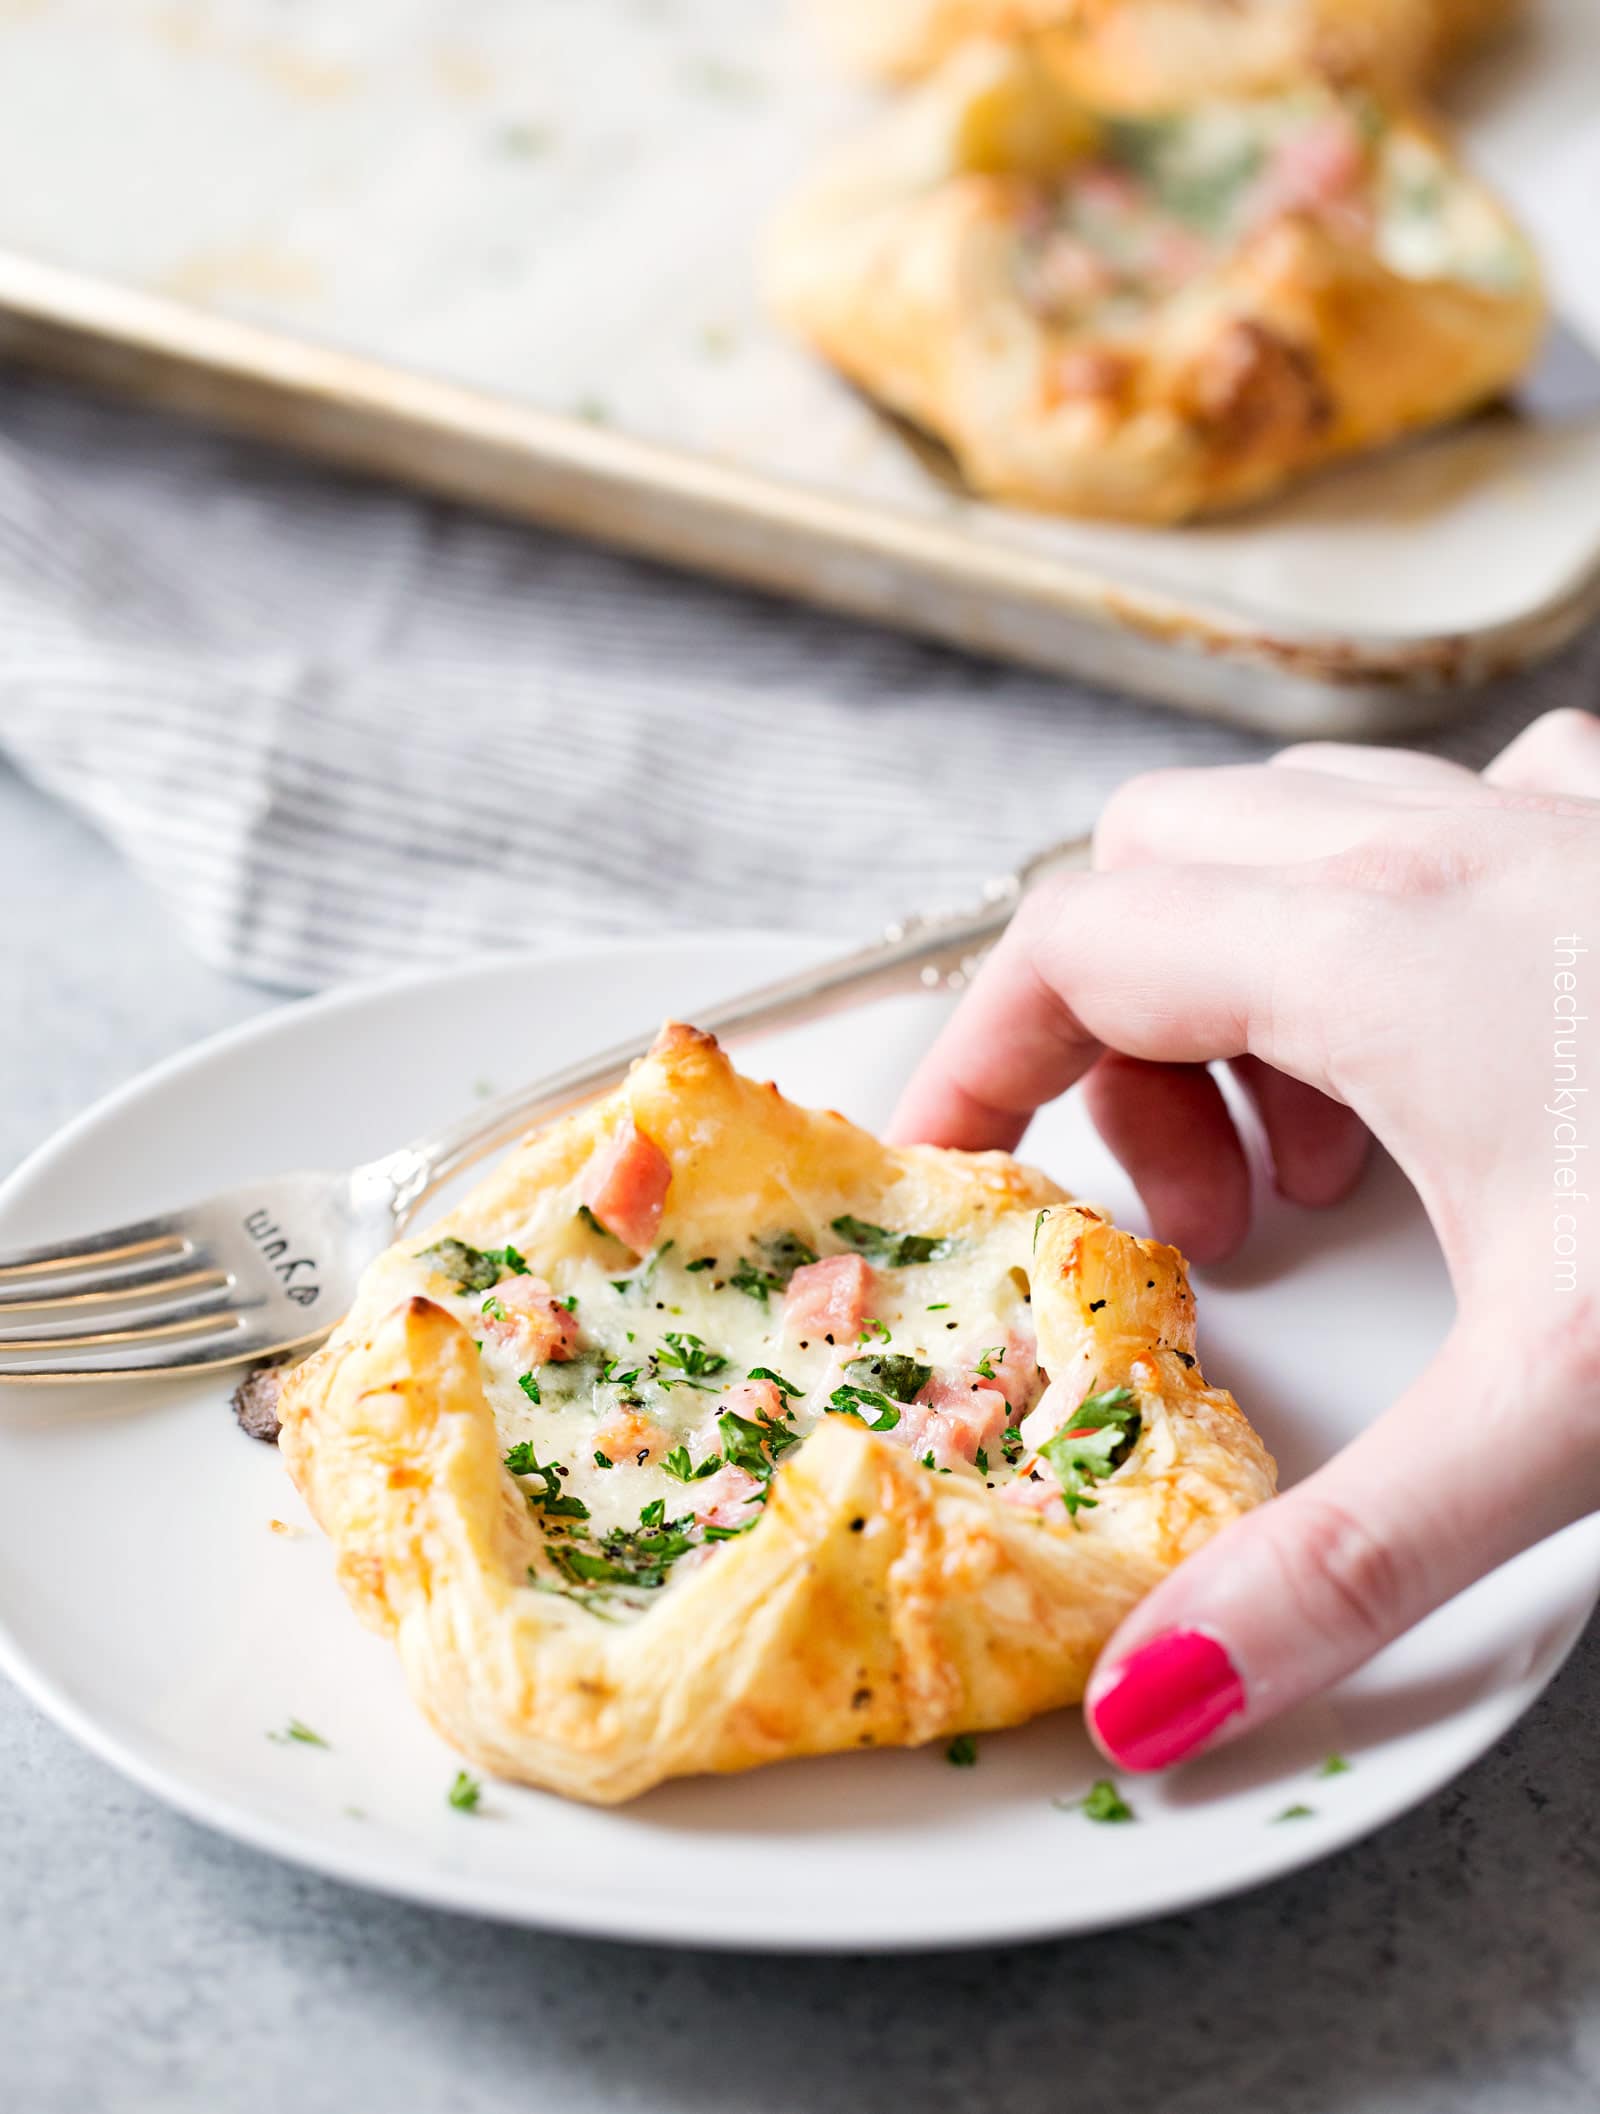 Ham and Cheese Spinach Puffs | Ready in just over 30 minutes, these spinach puffs are made with flaky puff pastry, wrapped around a creamy mixture of ham, gruyere cheese and fresh spinach. Perfect for using leftover ham! | http://thechunkychef.com